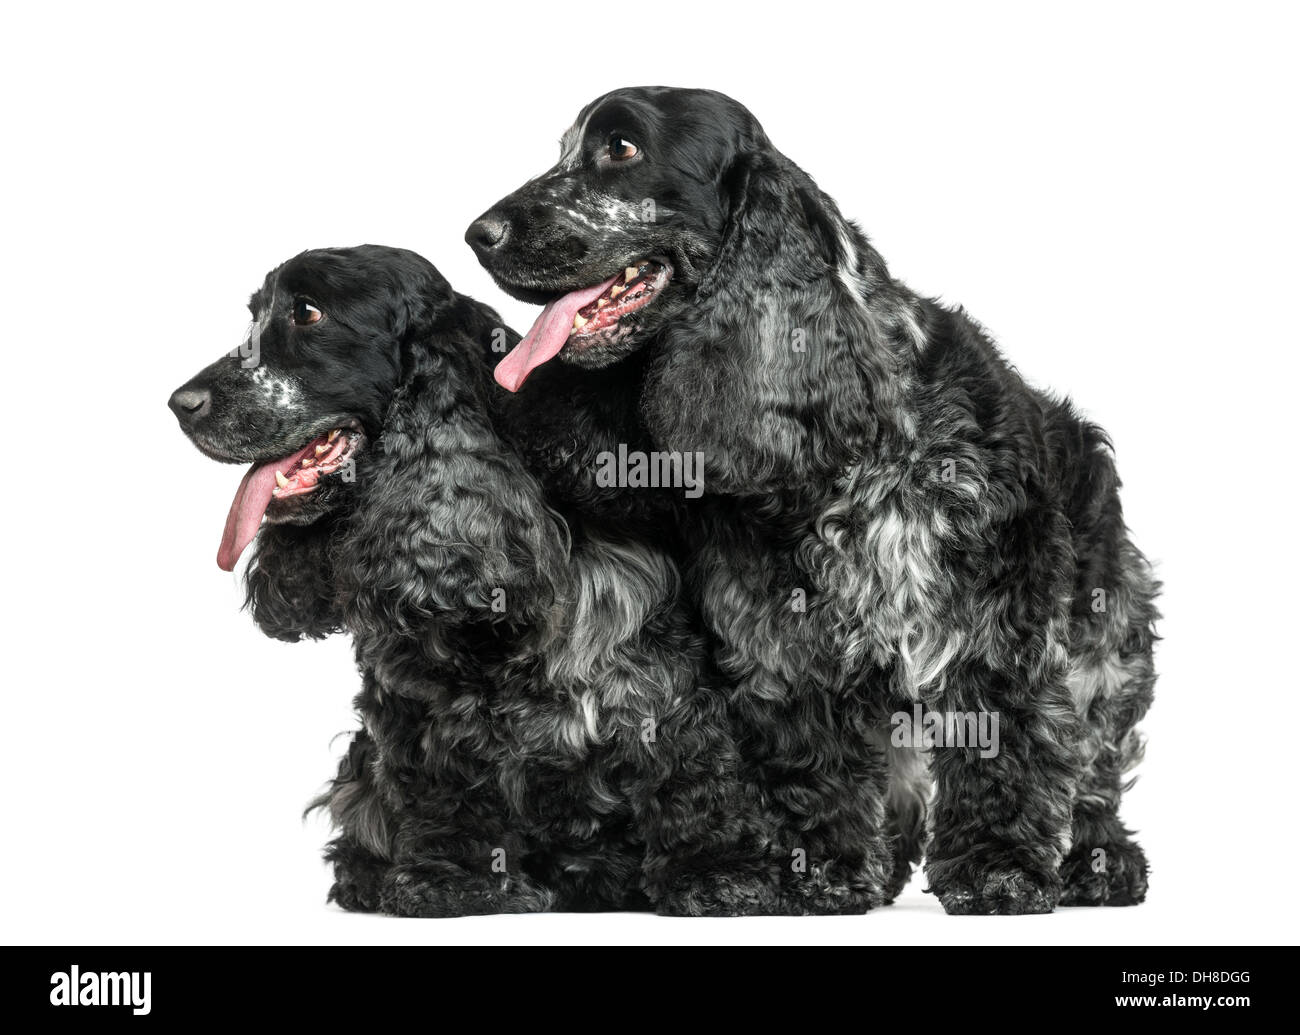 Two English Cocker Spaniel panting next to each other against white background Stock Photo